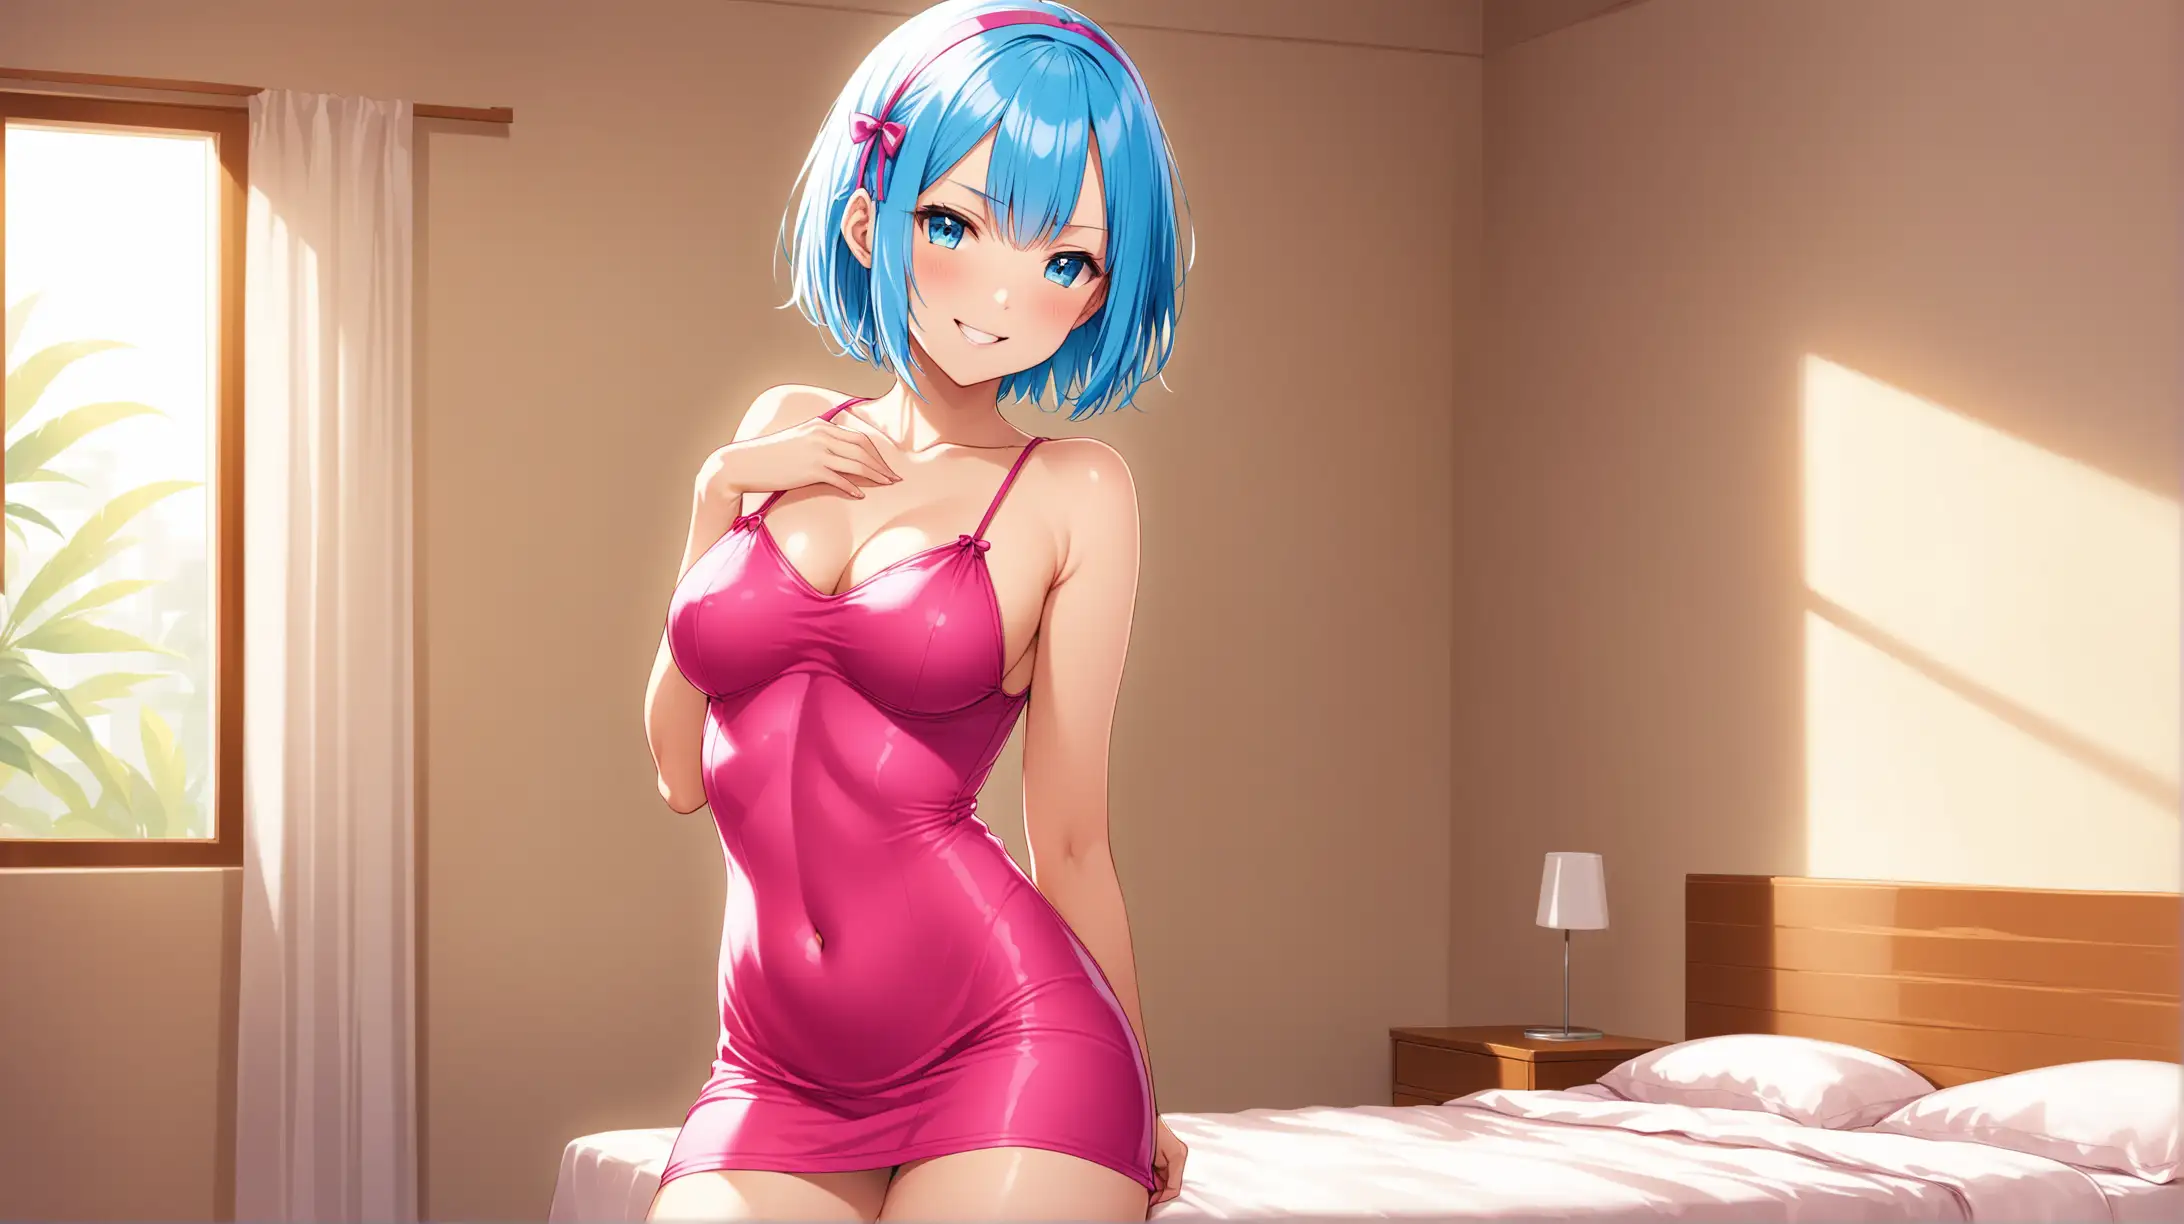 Draw the character Rem, high quality, natural lighting, long shot, indoors, bedroom, seductive pose, colorful minidress, erotic, smiling at the viewer